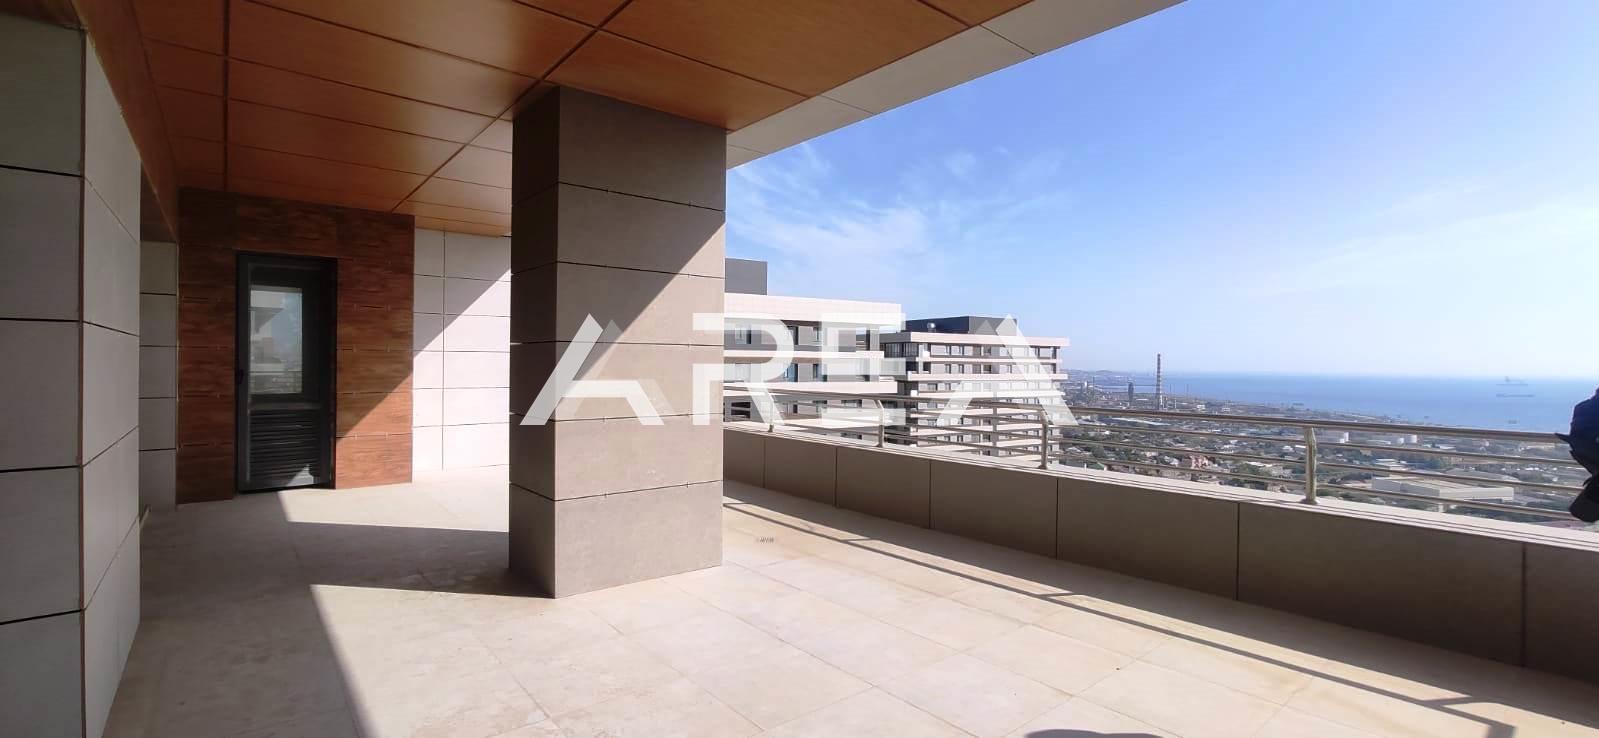 A 5-room unfurnished Penthouse is for sale in 